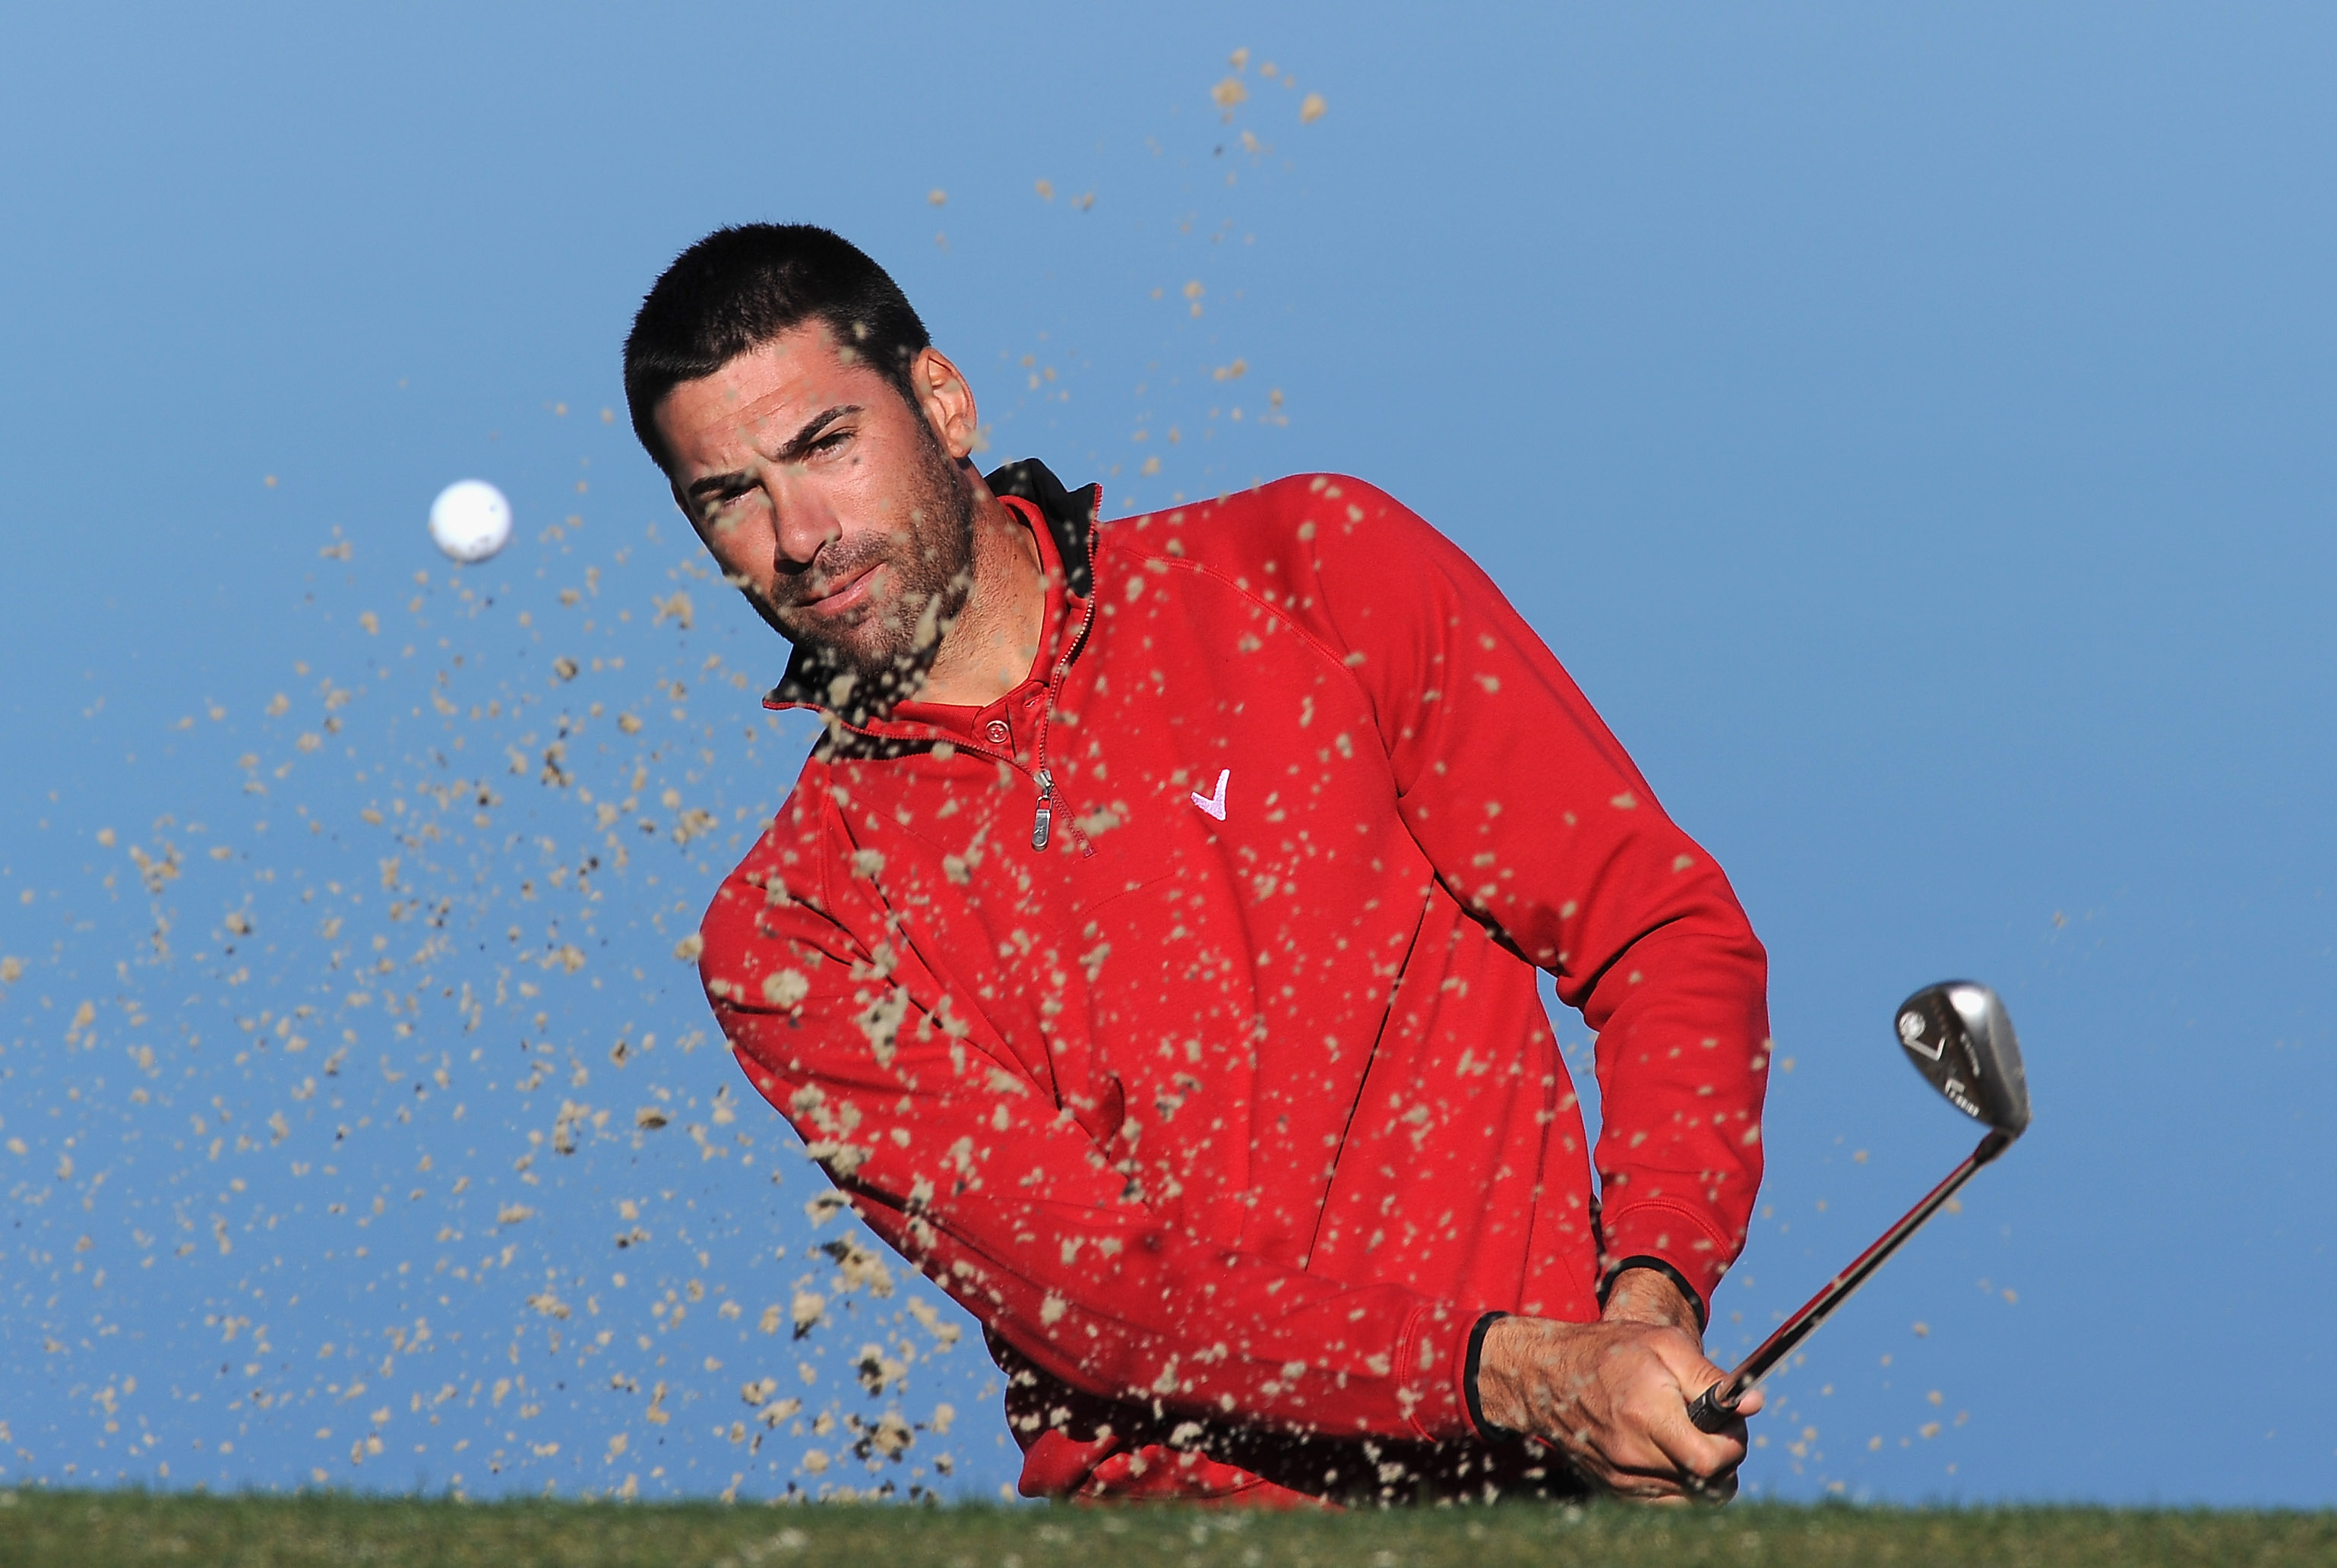 MARANA, AZ - FEBRUARY 22:  Alvaro Quiros of Spain plays a bunker shot during practice prior to the start of the World Golf Championships-Accenture Match Play Championship held at The Ritz-Carlton Golf Club, Dove Mountain on February 22, 2011 in Marana, Ar